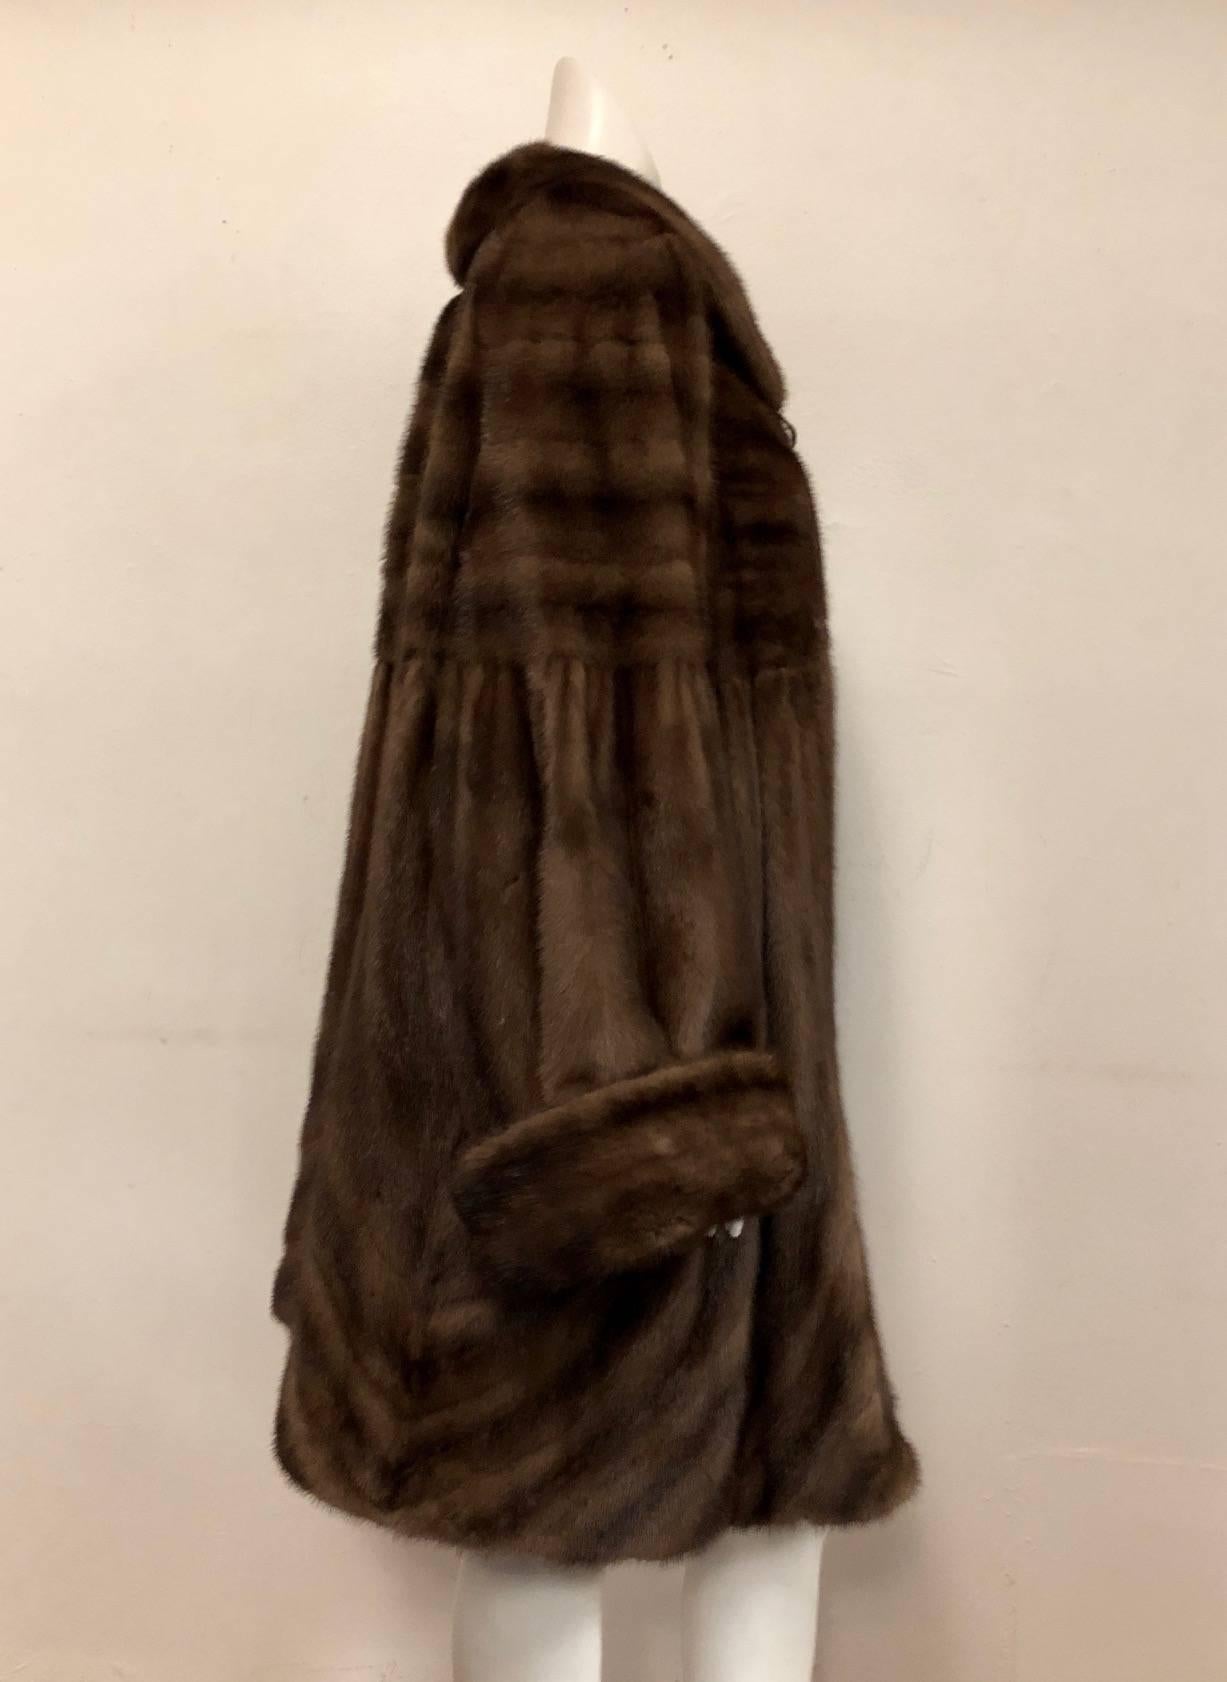 "More is More" when wearing this Magnificent Brown Mink Swing Coat!  Features ultra-luxurious pelts, shawl collar, and multi-directional construction.  Gathered body and curved cuts afford dramatic, feminine sweep.  Two on seam pockets,